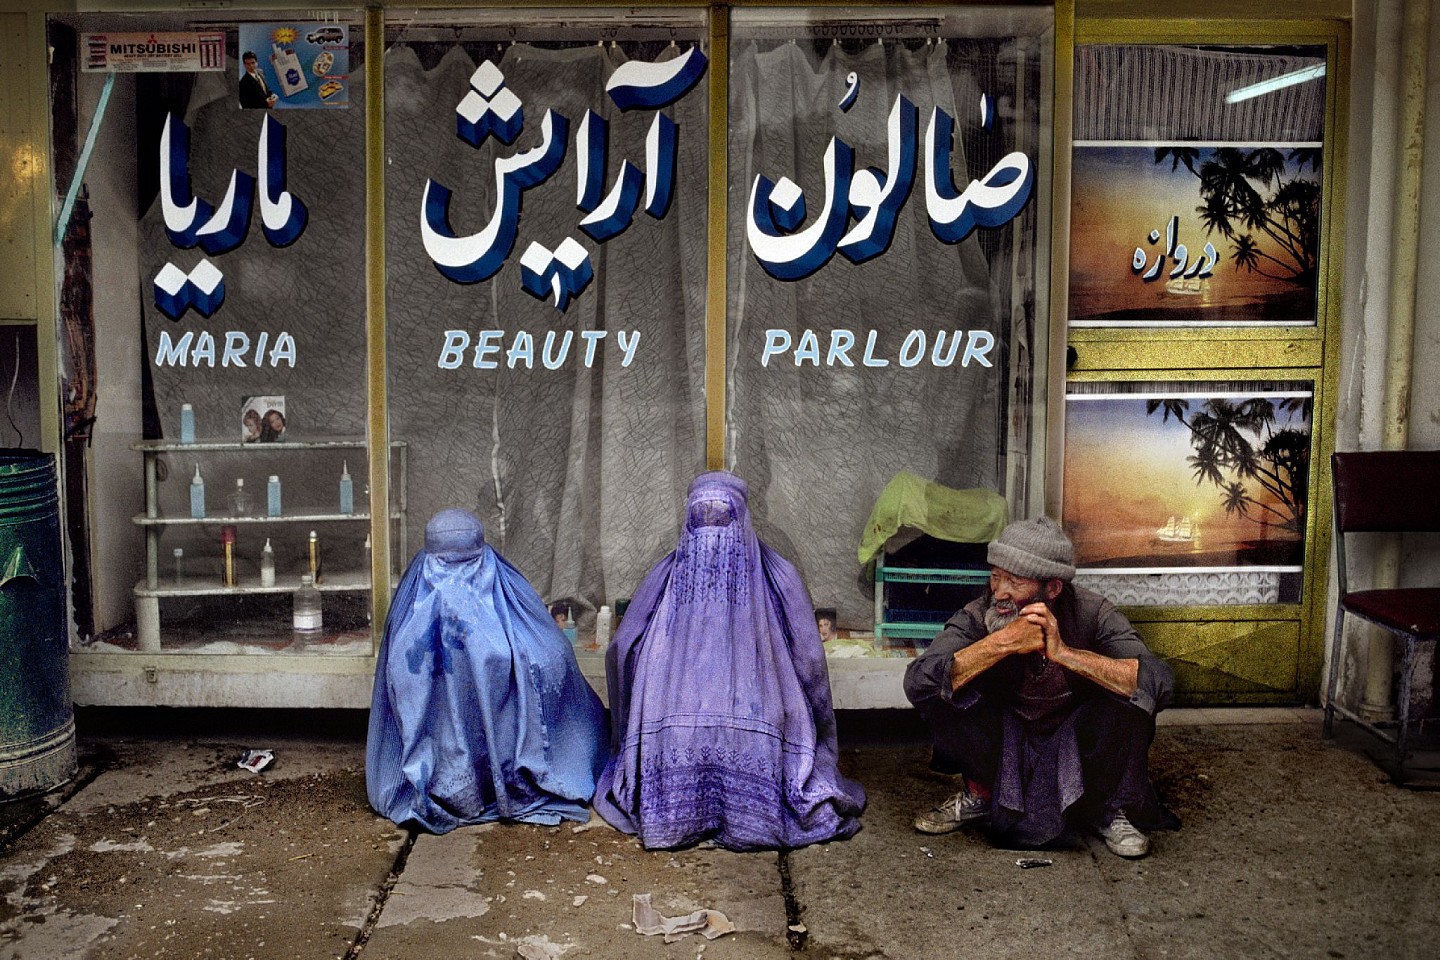 Steve McCurry, Women and Man Outside Beauty Parlour, 2002
FujiFlex Crystal Archive Print
Price/Size on request